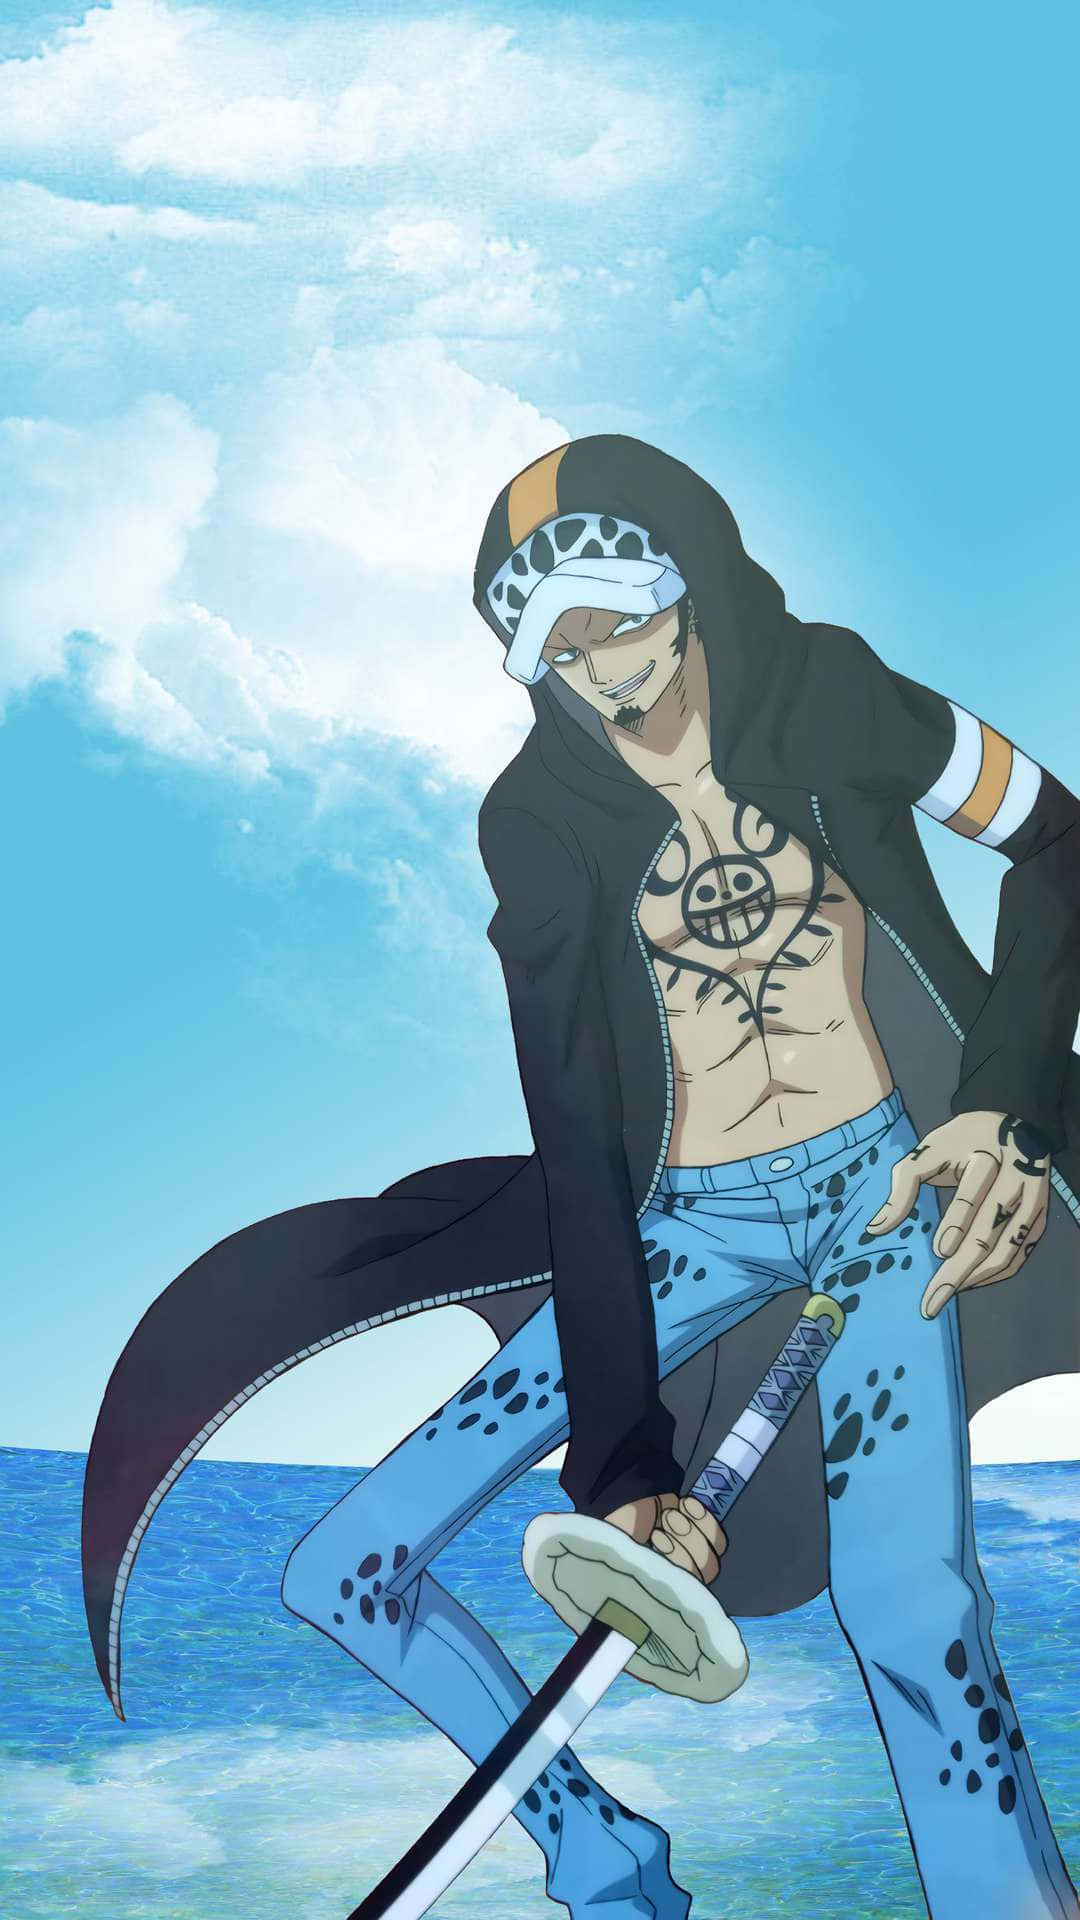 Meet Trafalgar Law, the Pirate from the One Piece Series Wallpaper